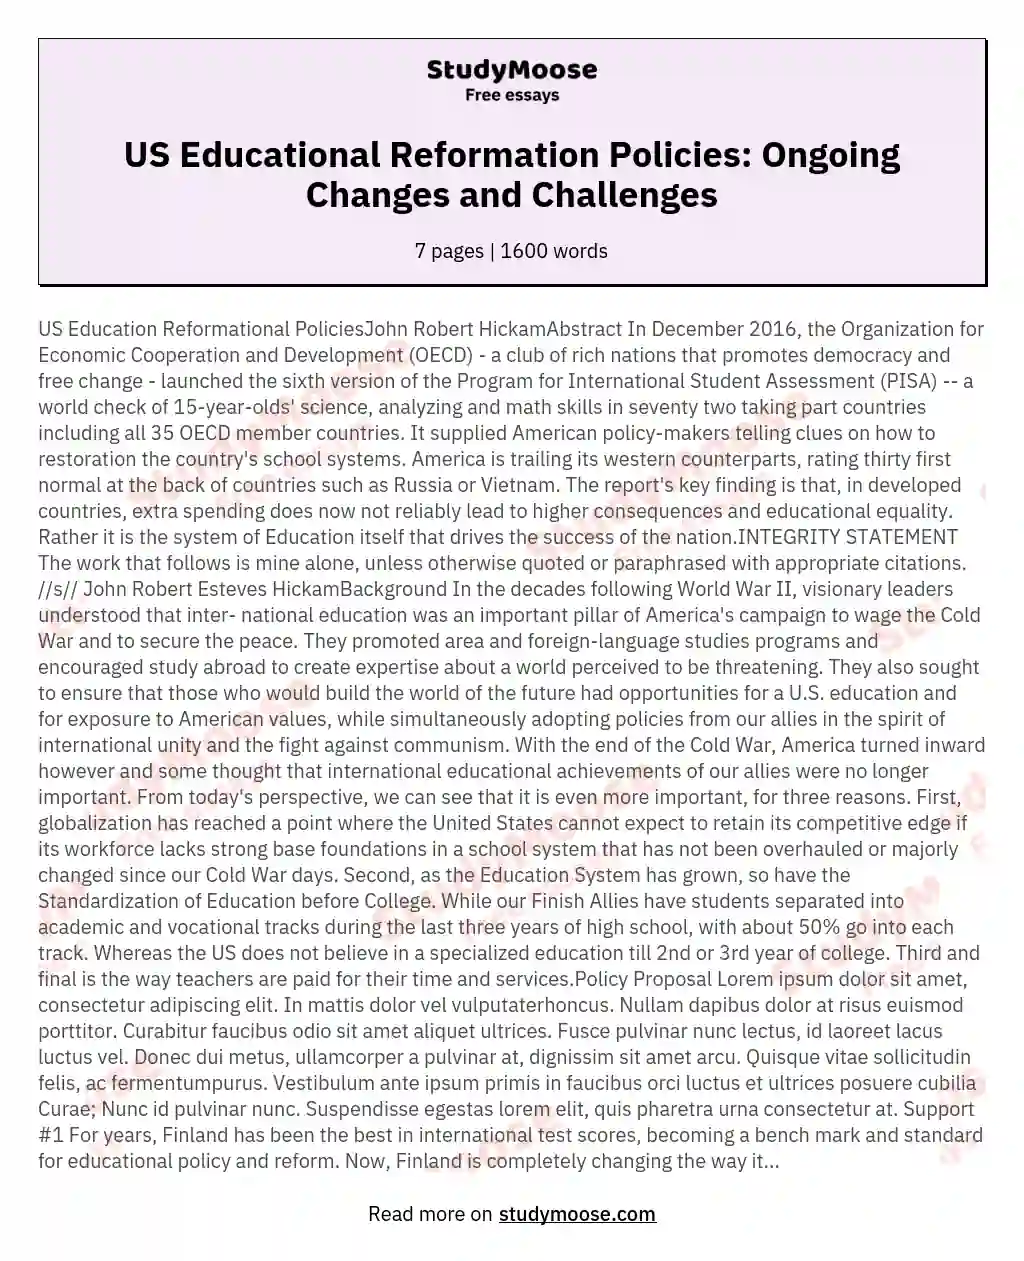 US Educational Reformation Policies: Ongoing Changes and Challenges essay